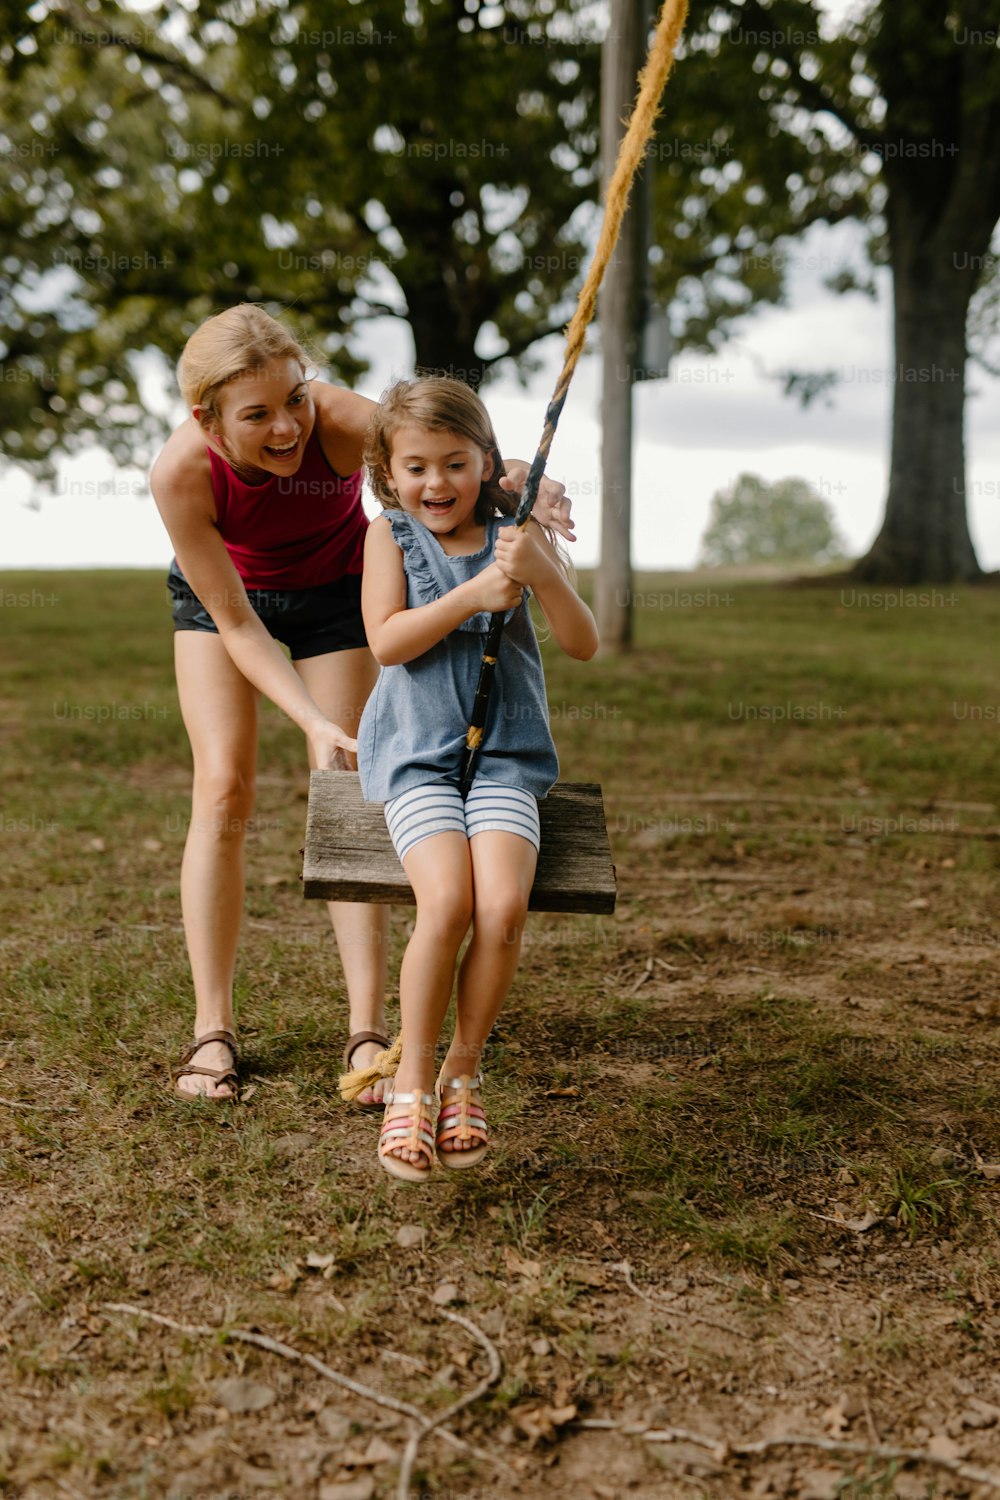 a young girl holding a baseball bat next to a young girl